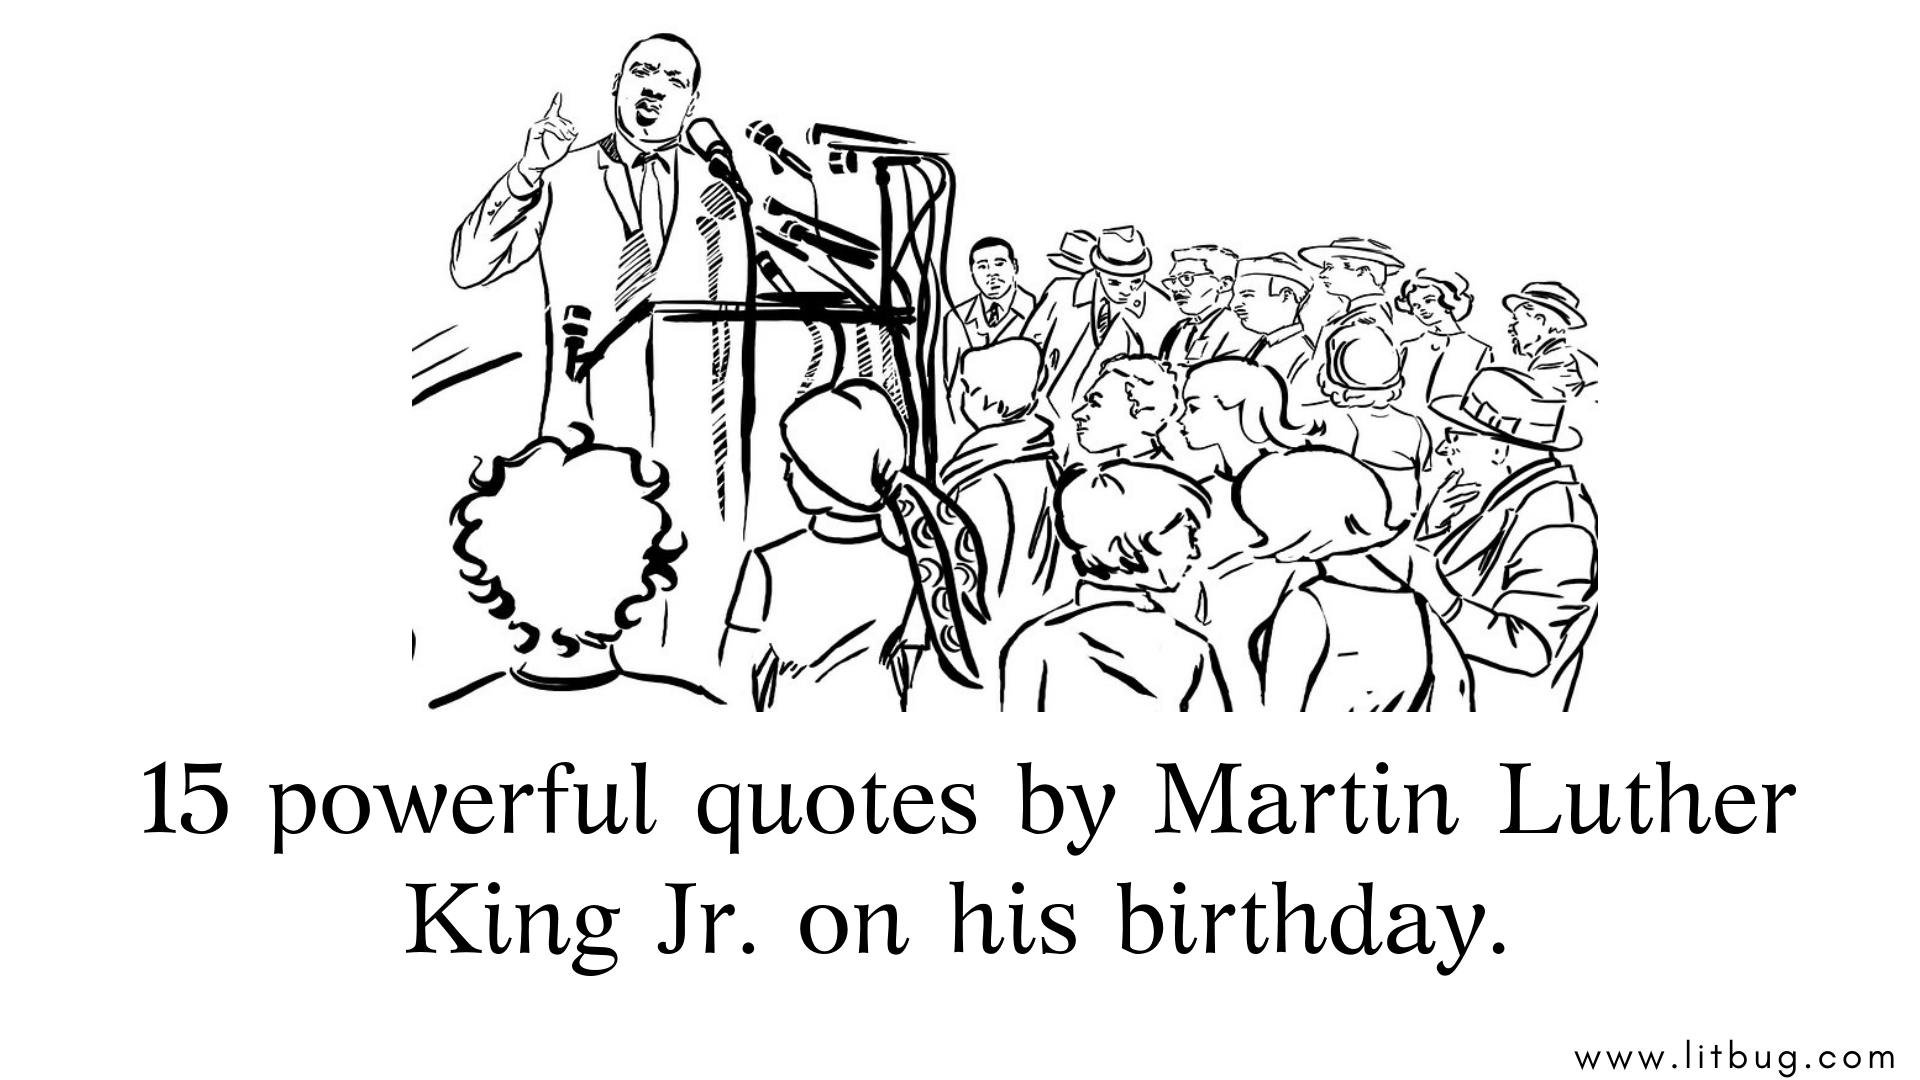 15-powerful-quotes-by-martin-luther-king-jr-on-his-birthday-litbug